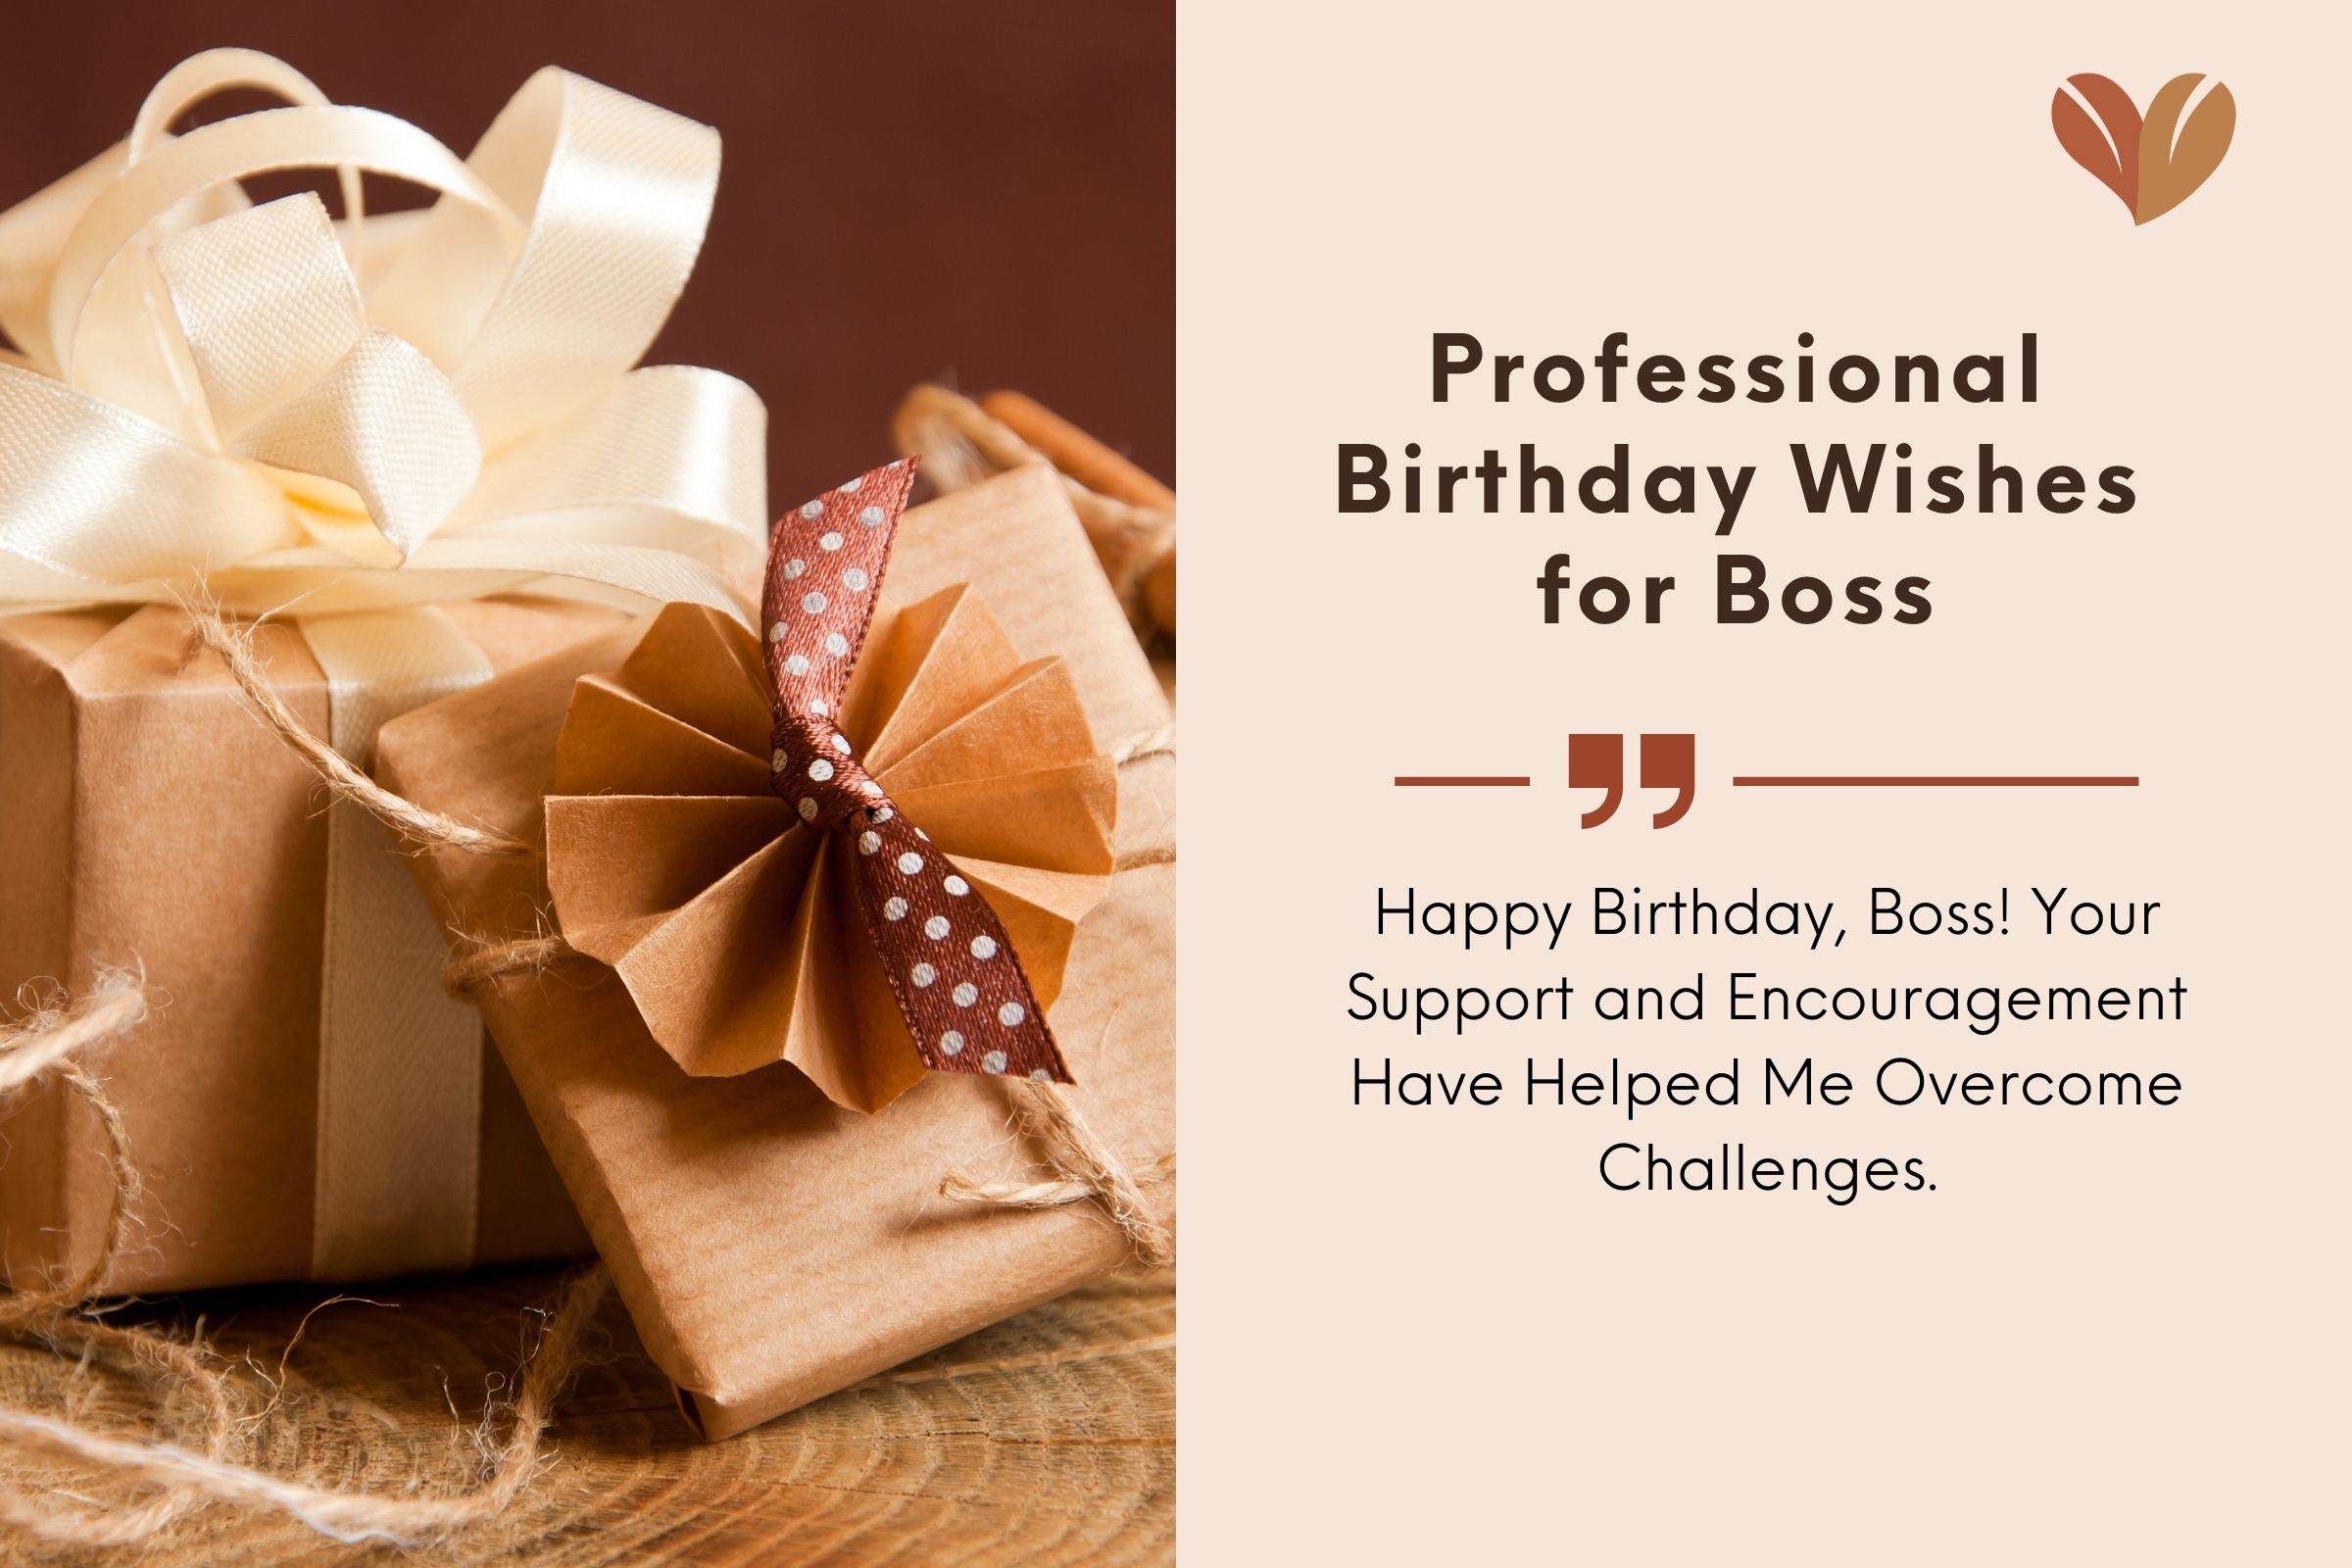 Collective well-wishing in professional birthday wishes for boss.